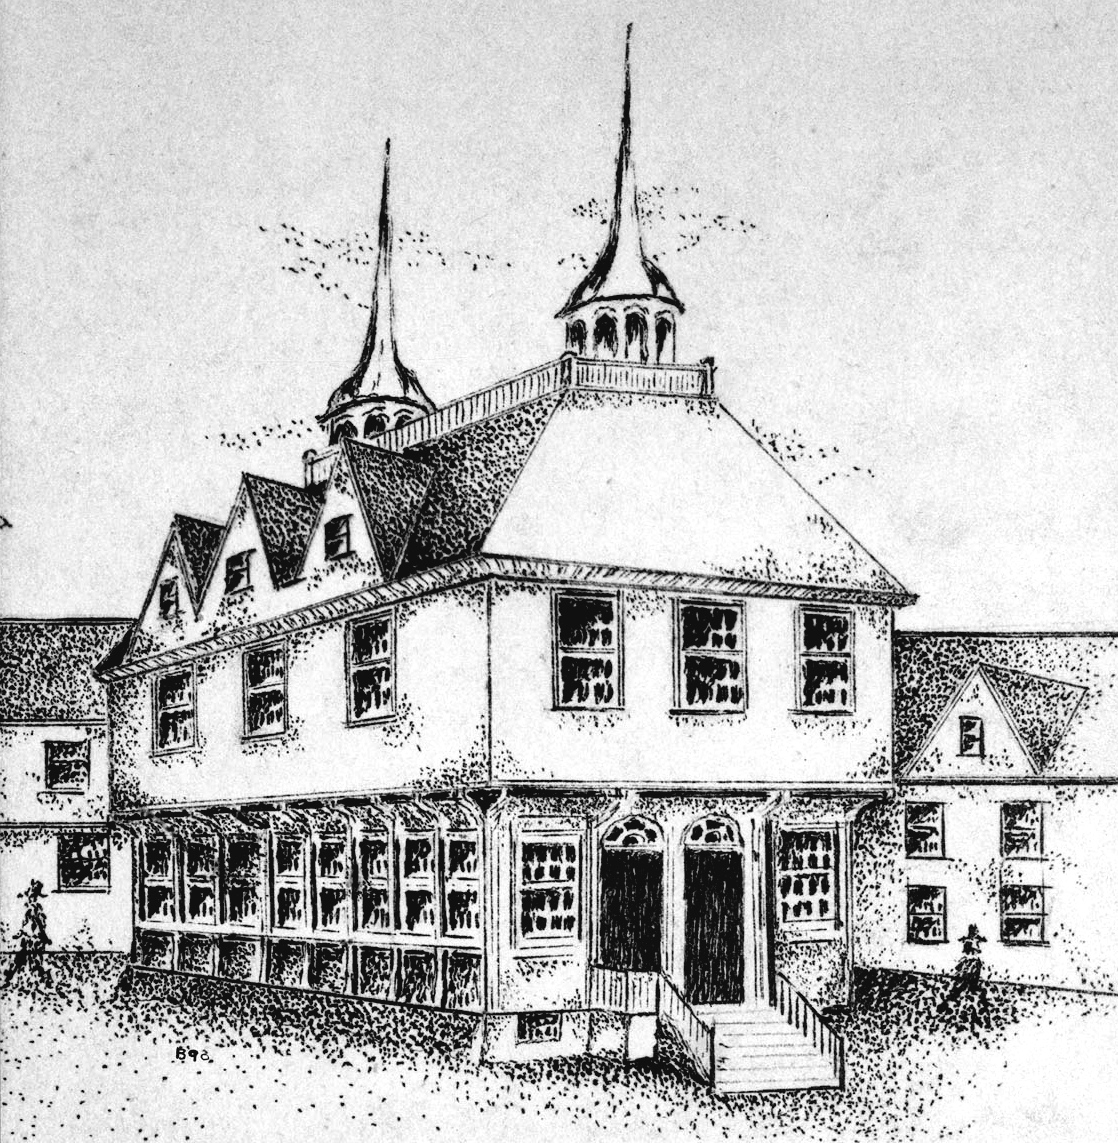 The First Town-House in Boston, where the AHAC would meet.